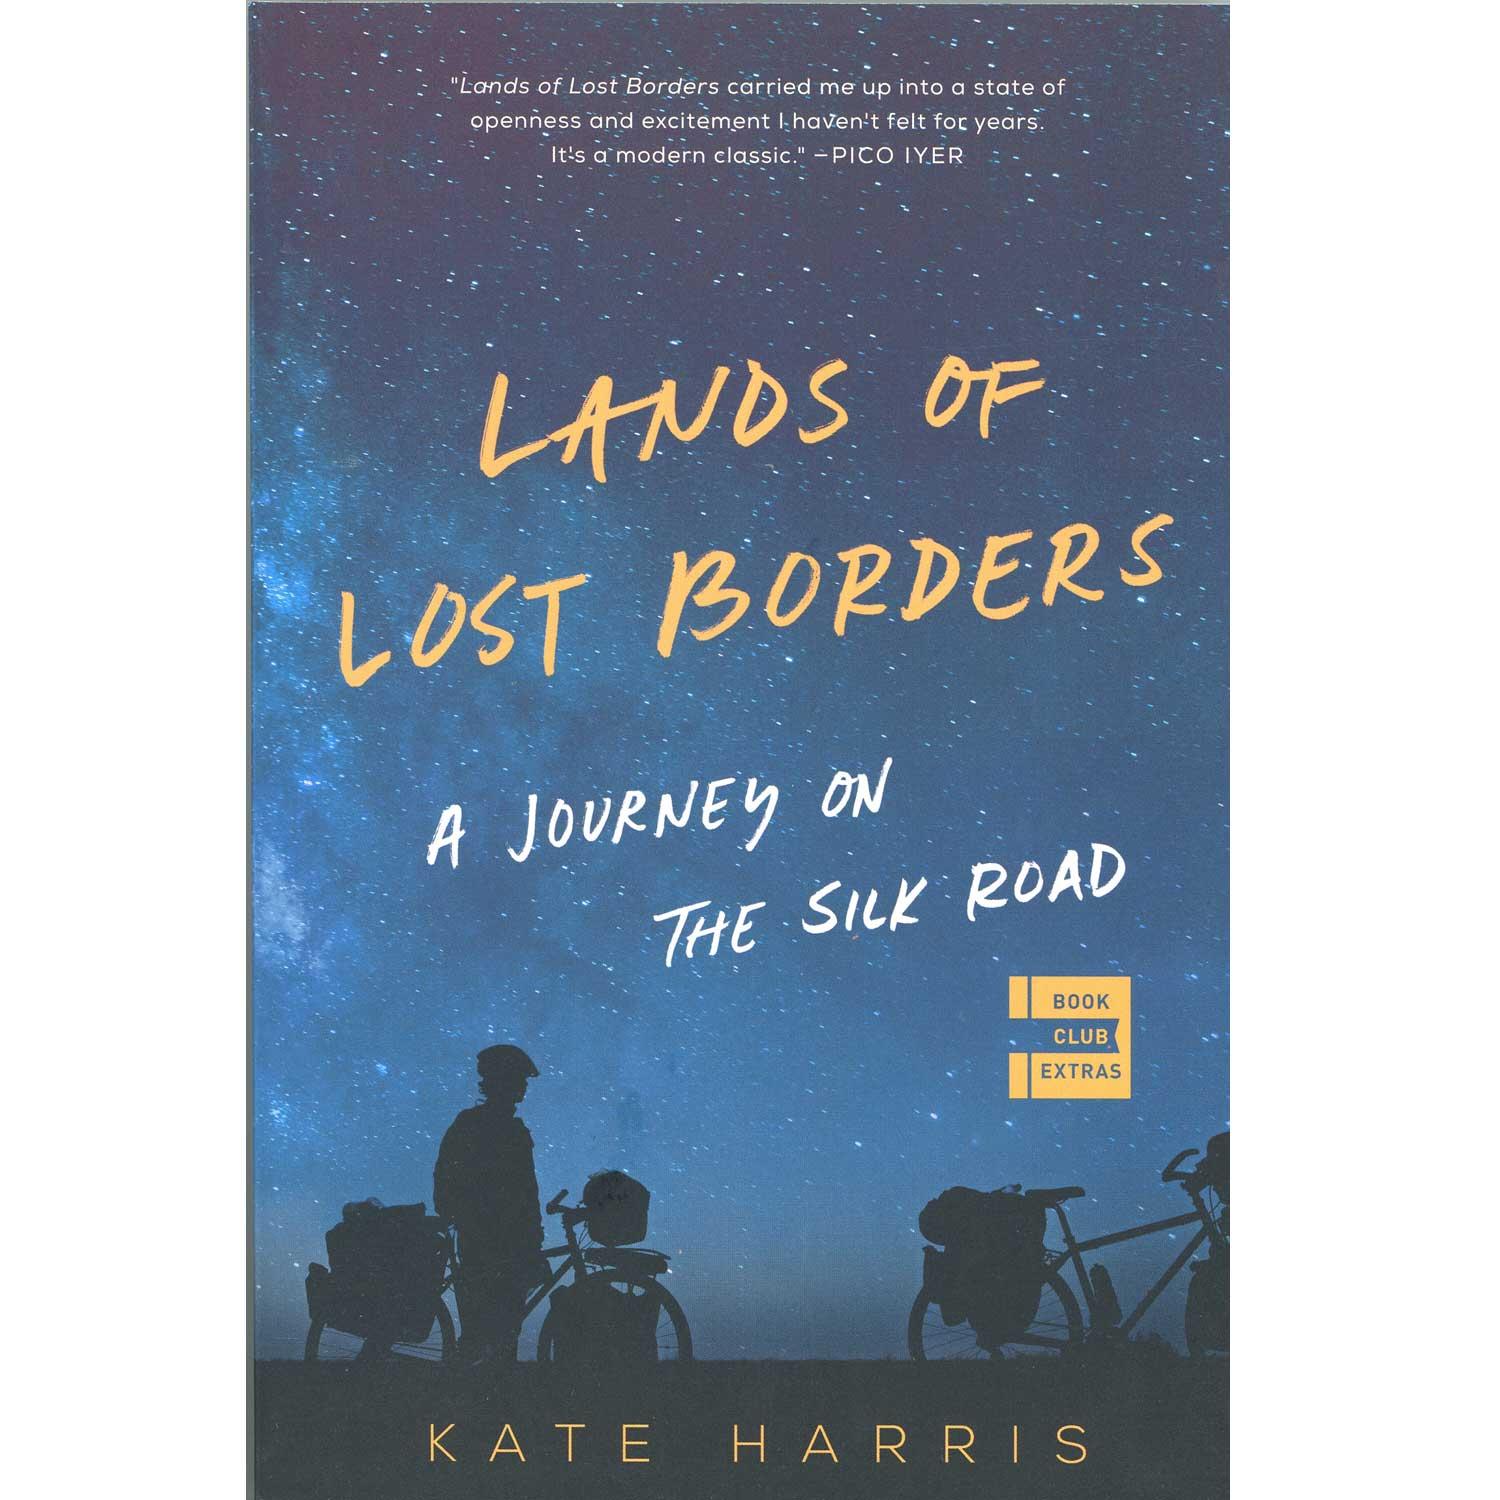 lands of the lost borders